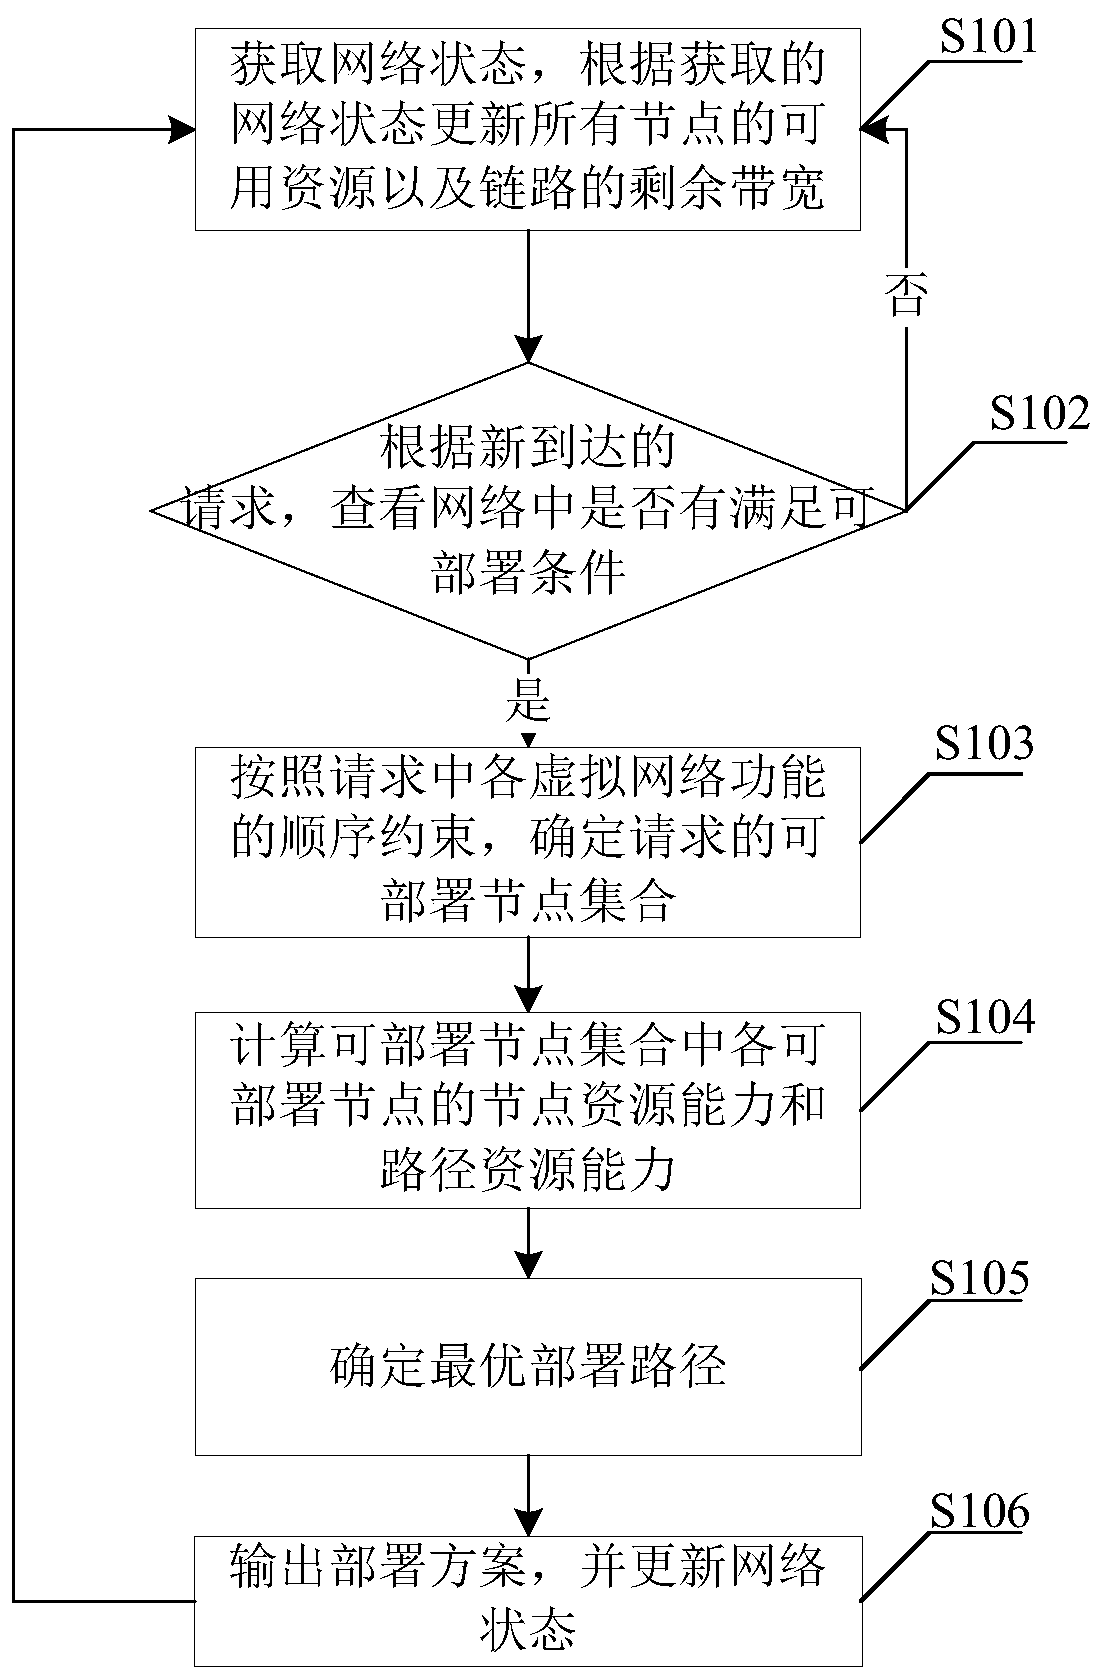 Virtual network function deployment method suitable for multi-dimensional resource optimal configuration